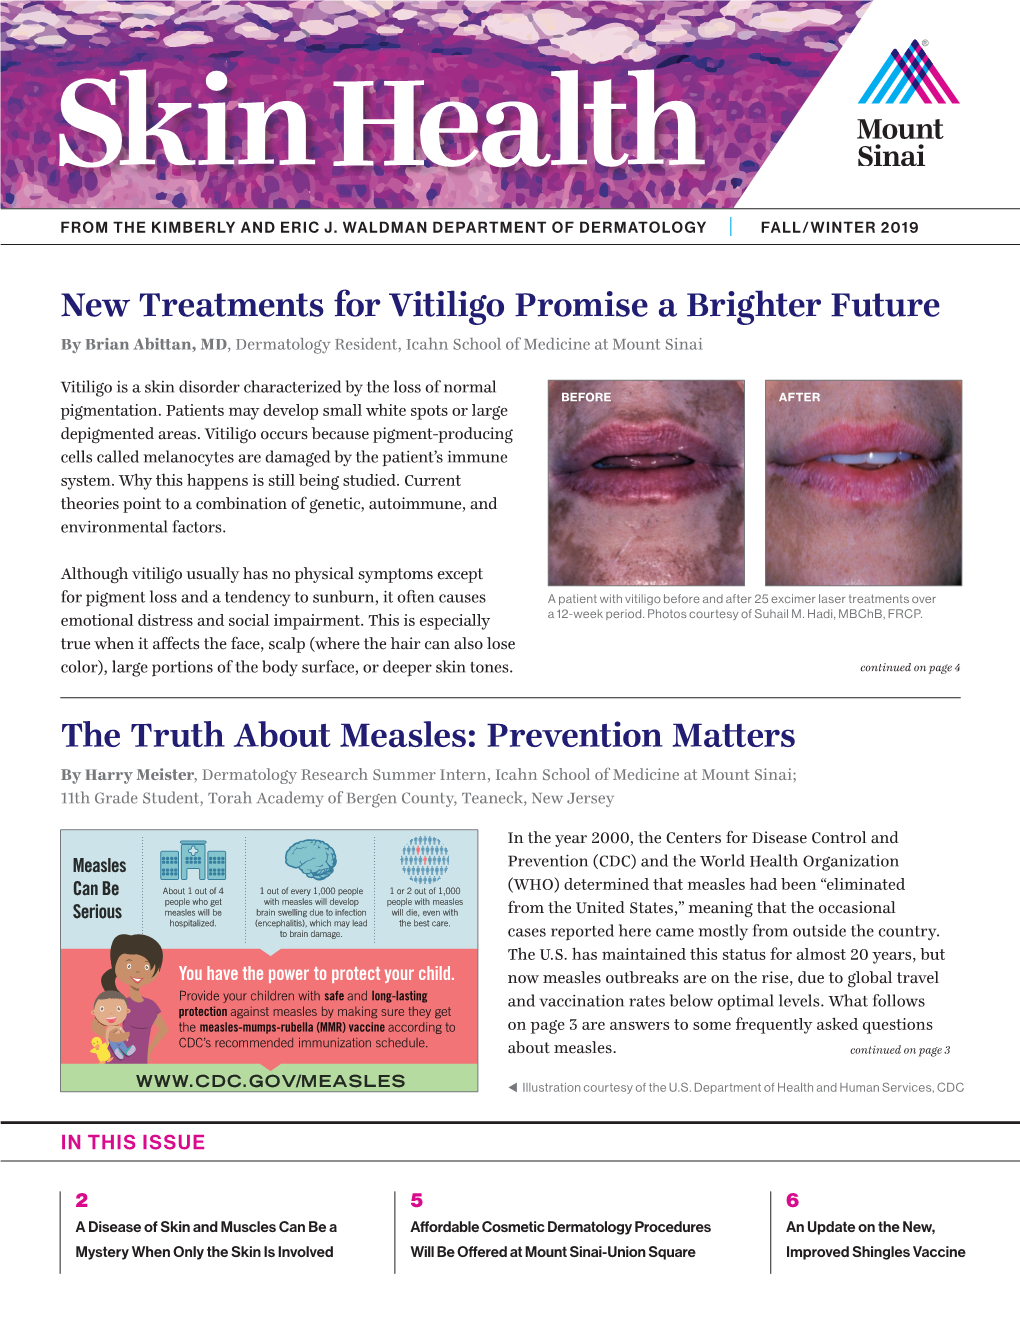 New Treatments for Vitiligo Promise a Brighter Future by Brian Abittan, MD, Dermatology Resident, Icahn School of Medicine at Mount Sinai